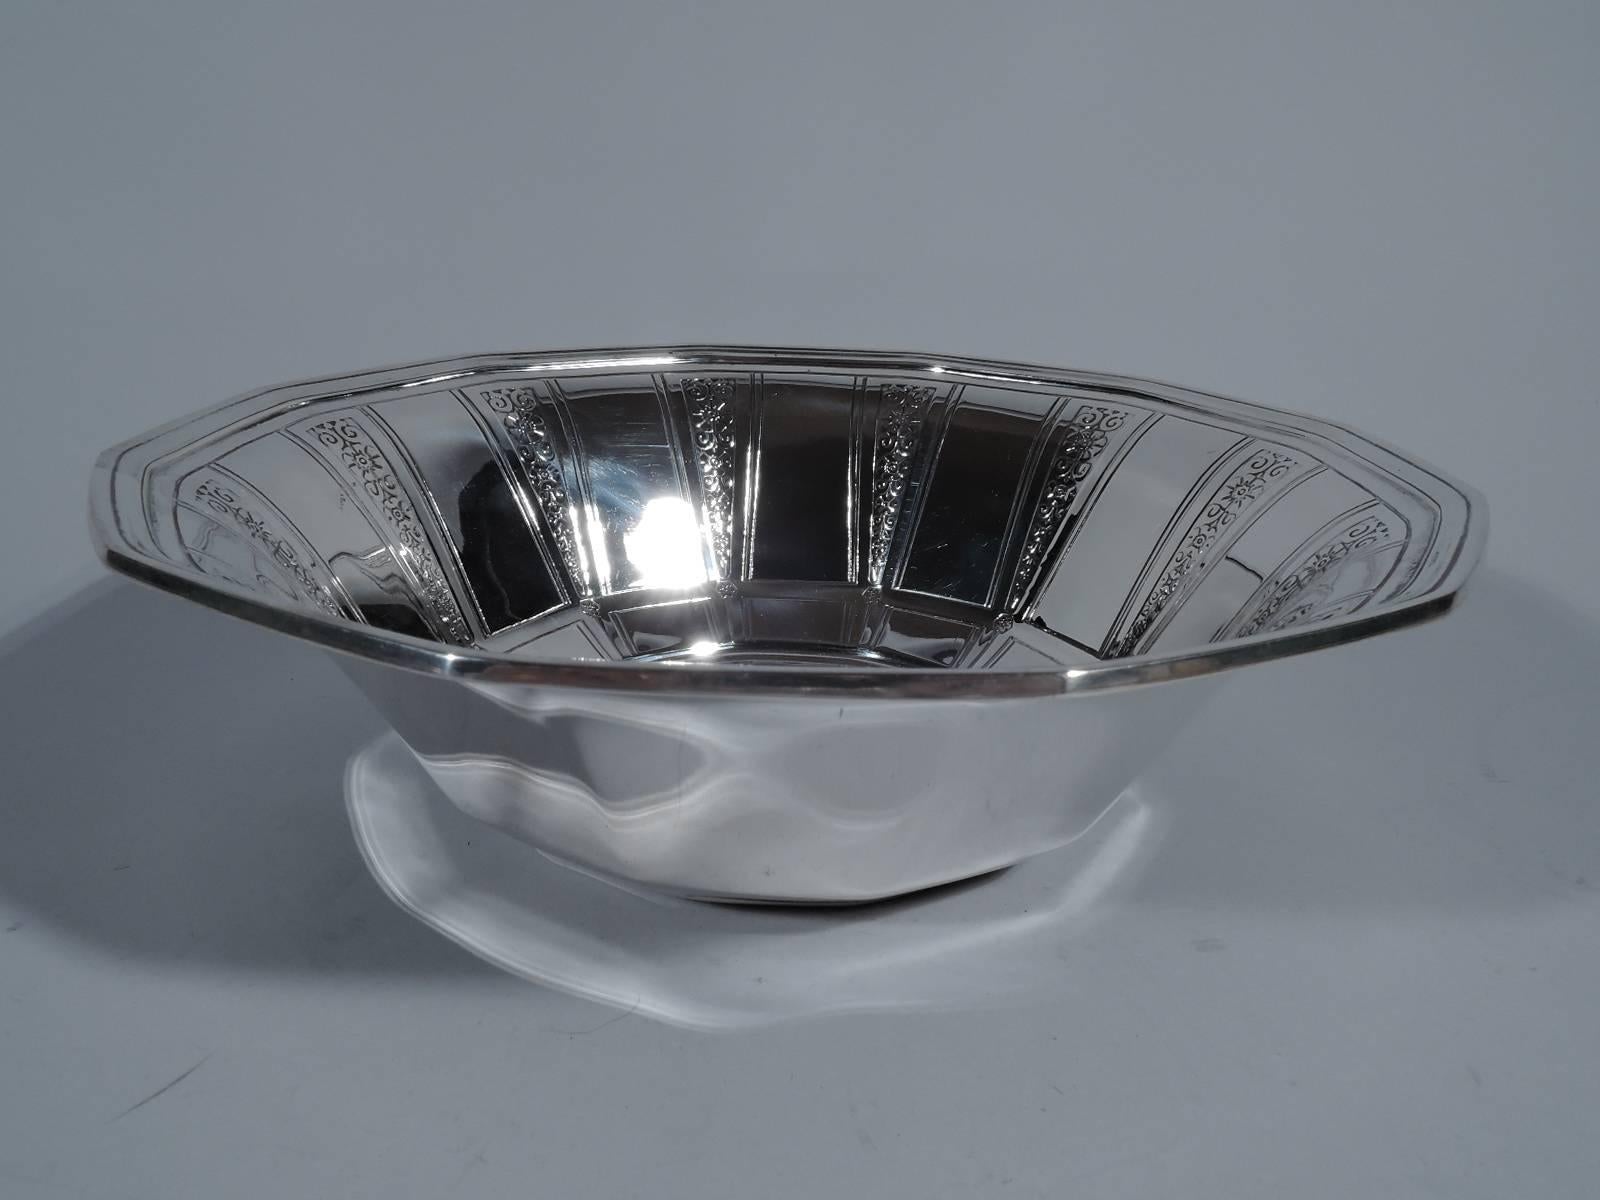 Art Deco sterling silver bowl. Made by Tiffany & Co. in New York, ca 1924. Tapering and faceted sides with molded rim. Interior has alternating engraved pilasters and acid-etched triangles with stylized flowers and scrolls. Hallmark includes pattern